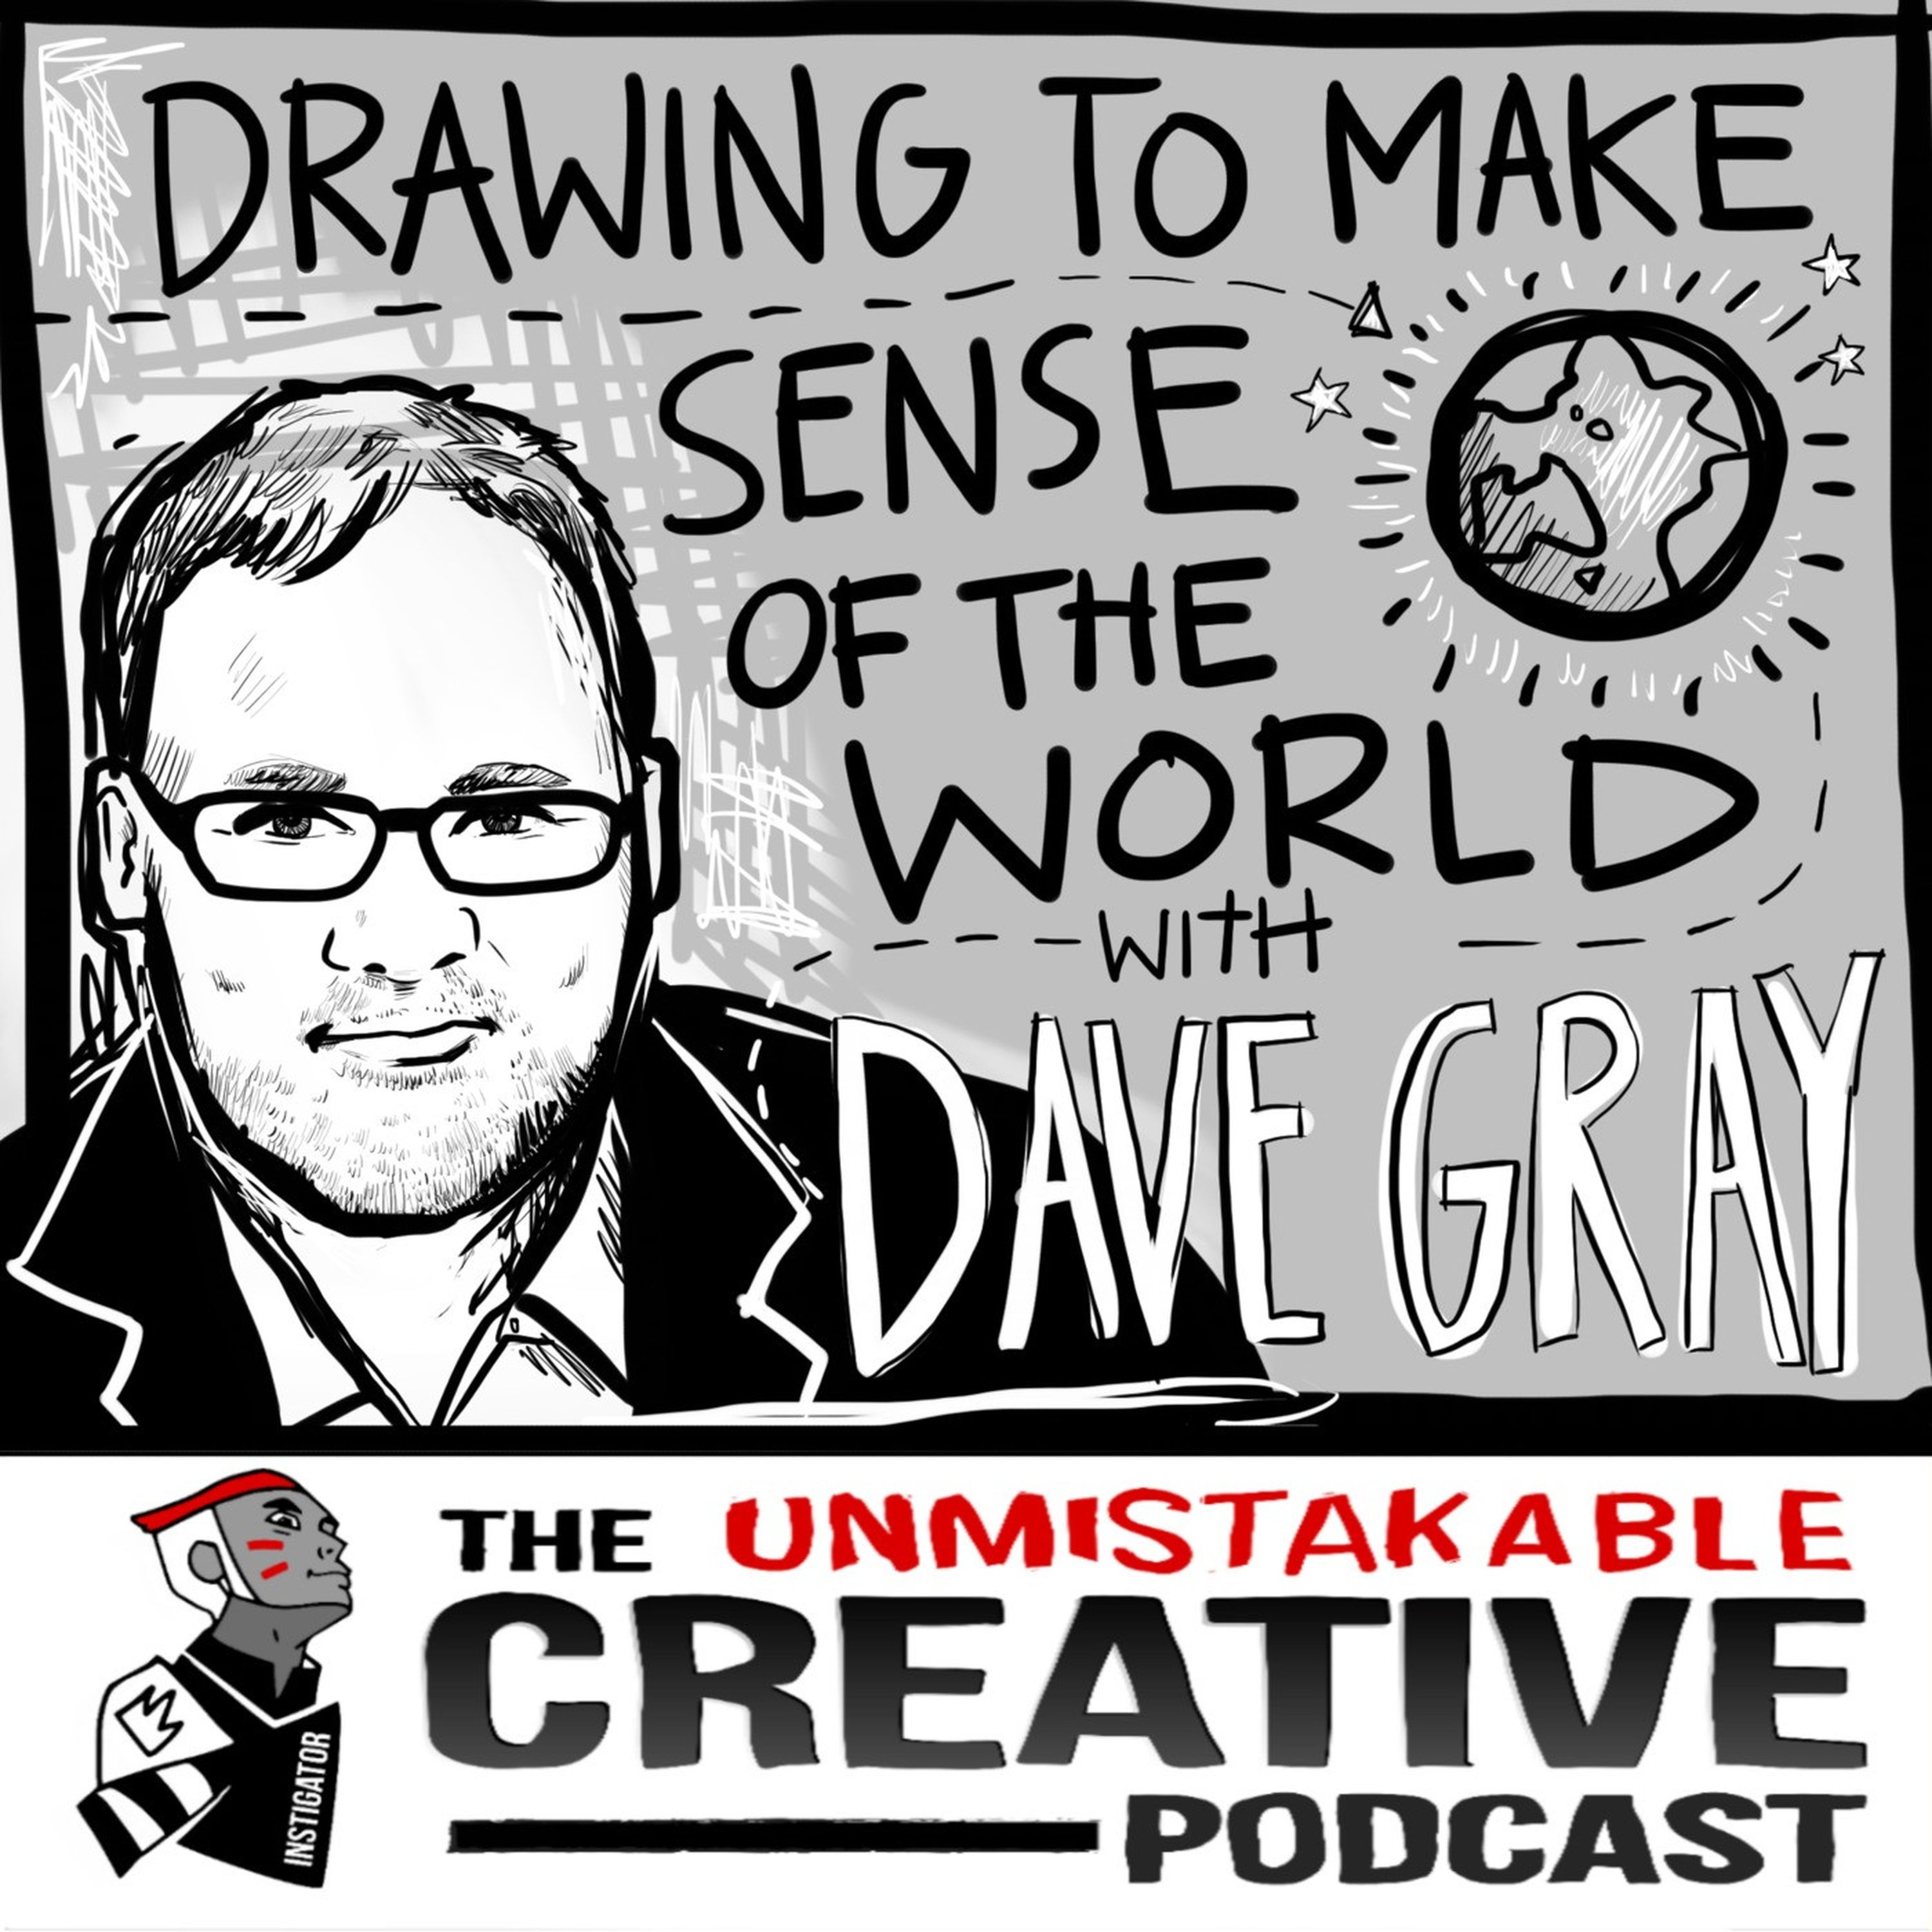 Drawing to Make Sense of the World with Dave Gray Image